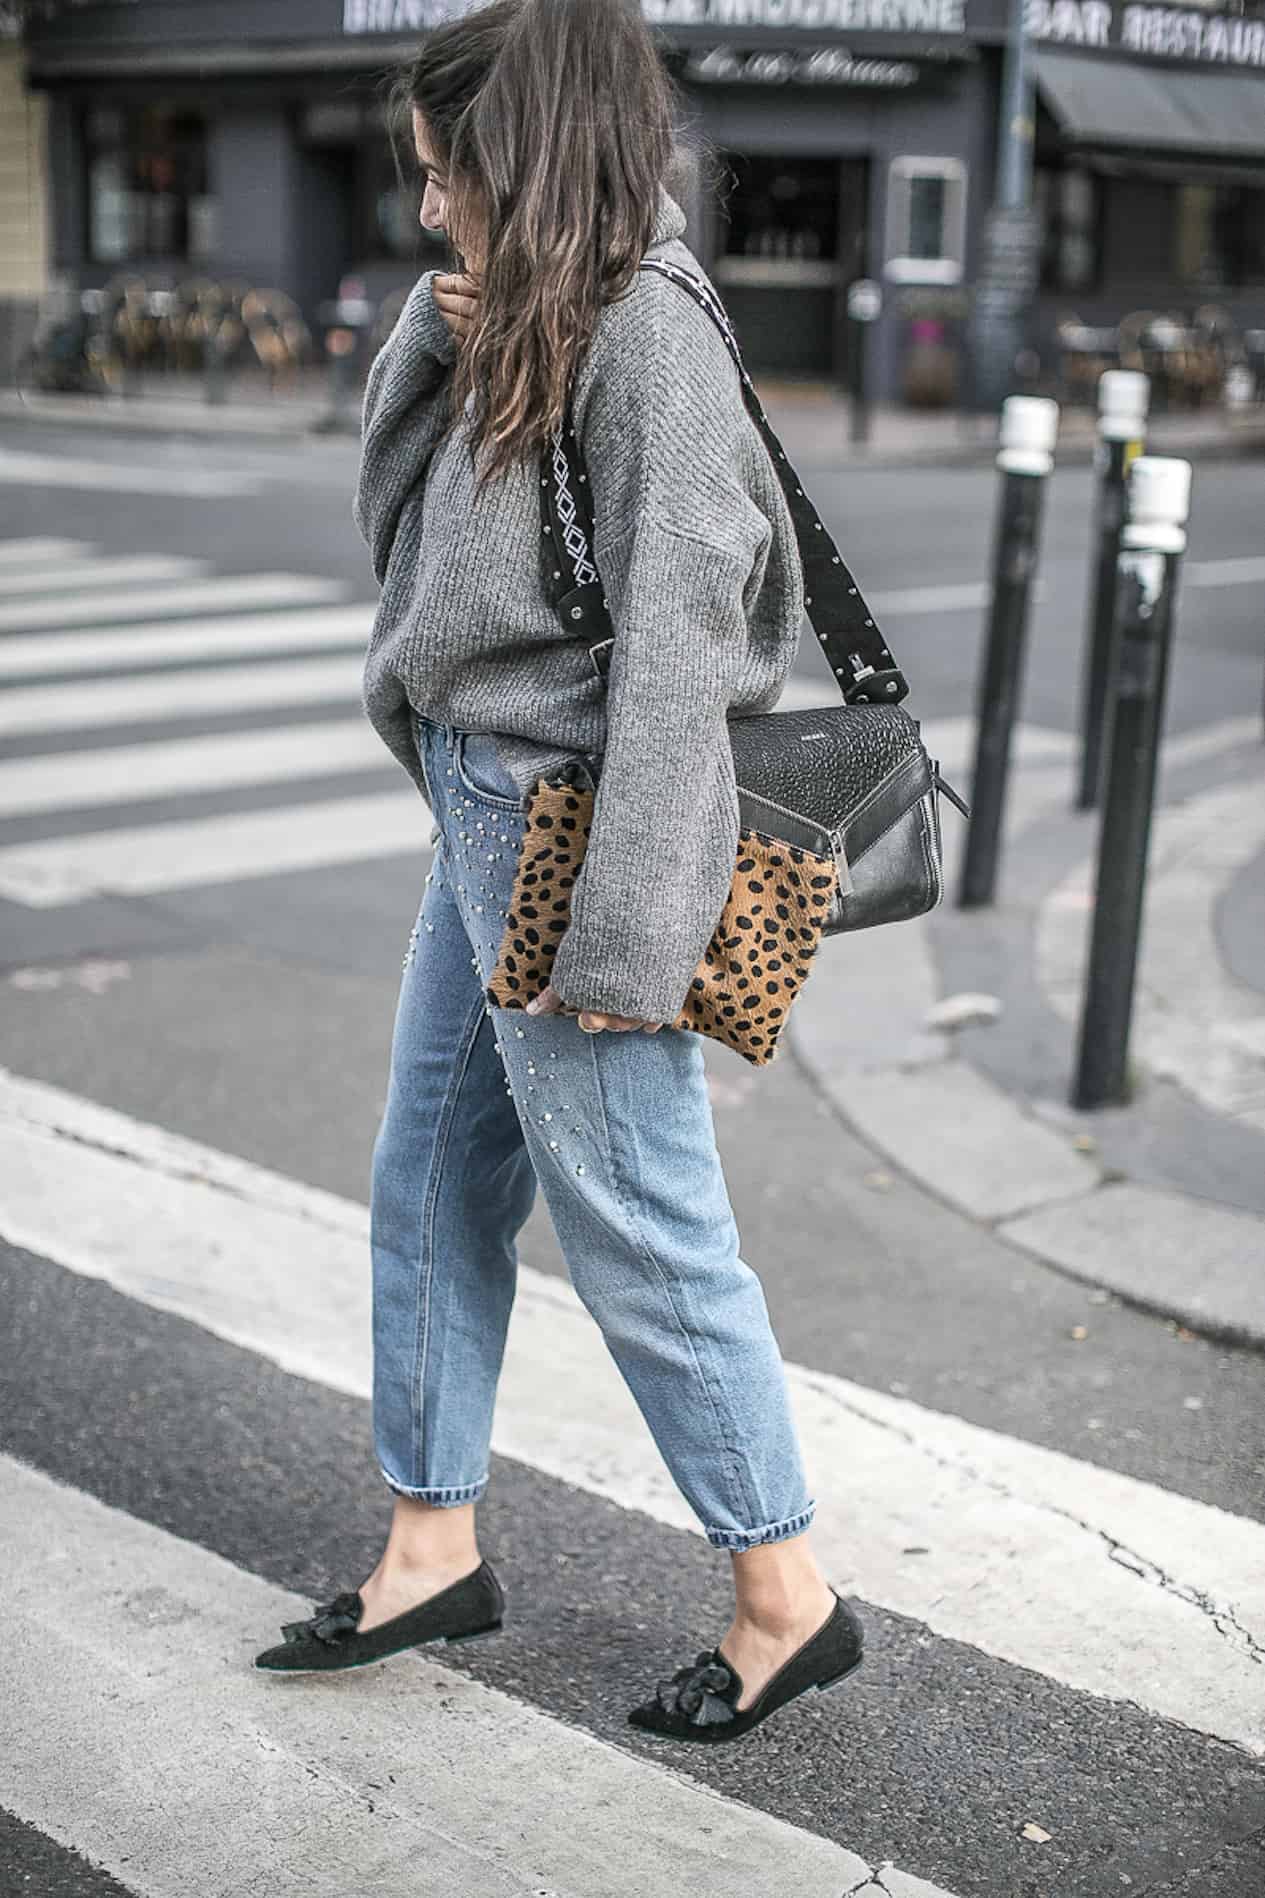 Young woman in grey sweater and embellished boyfriend jeans walks in the street.